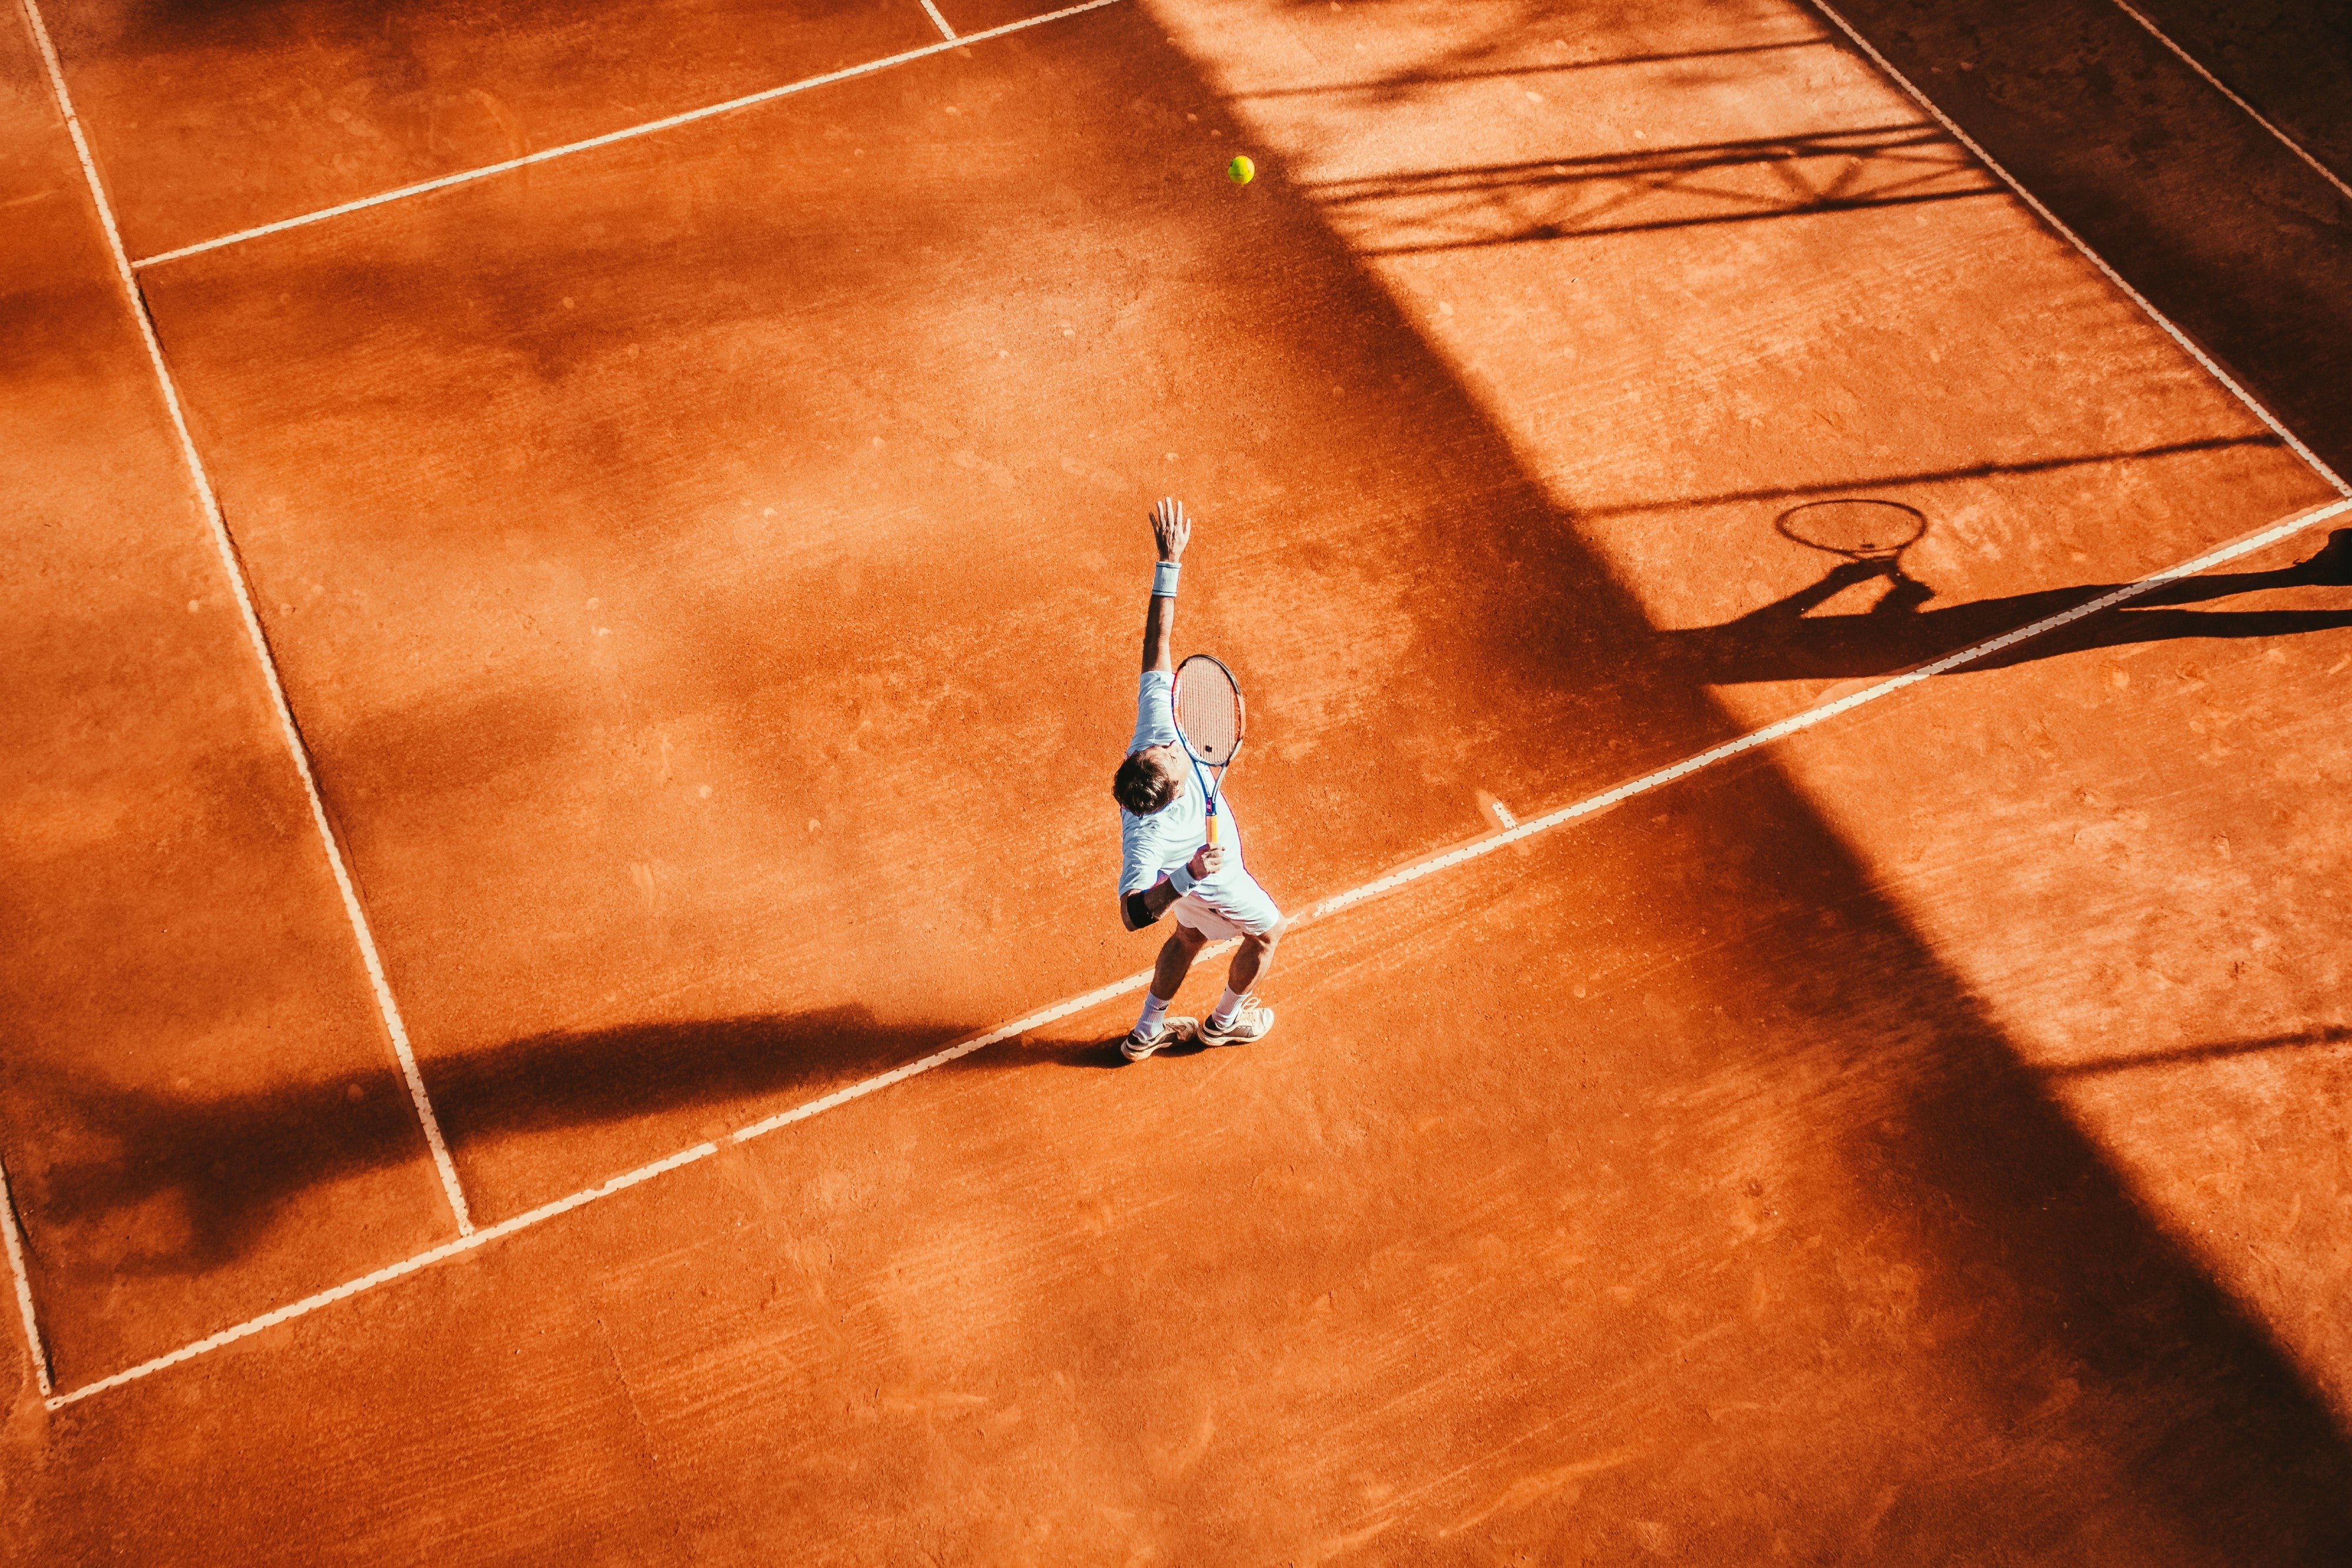 photographing tennis